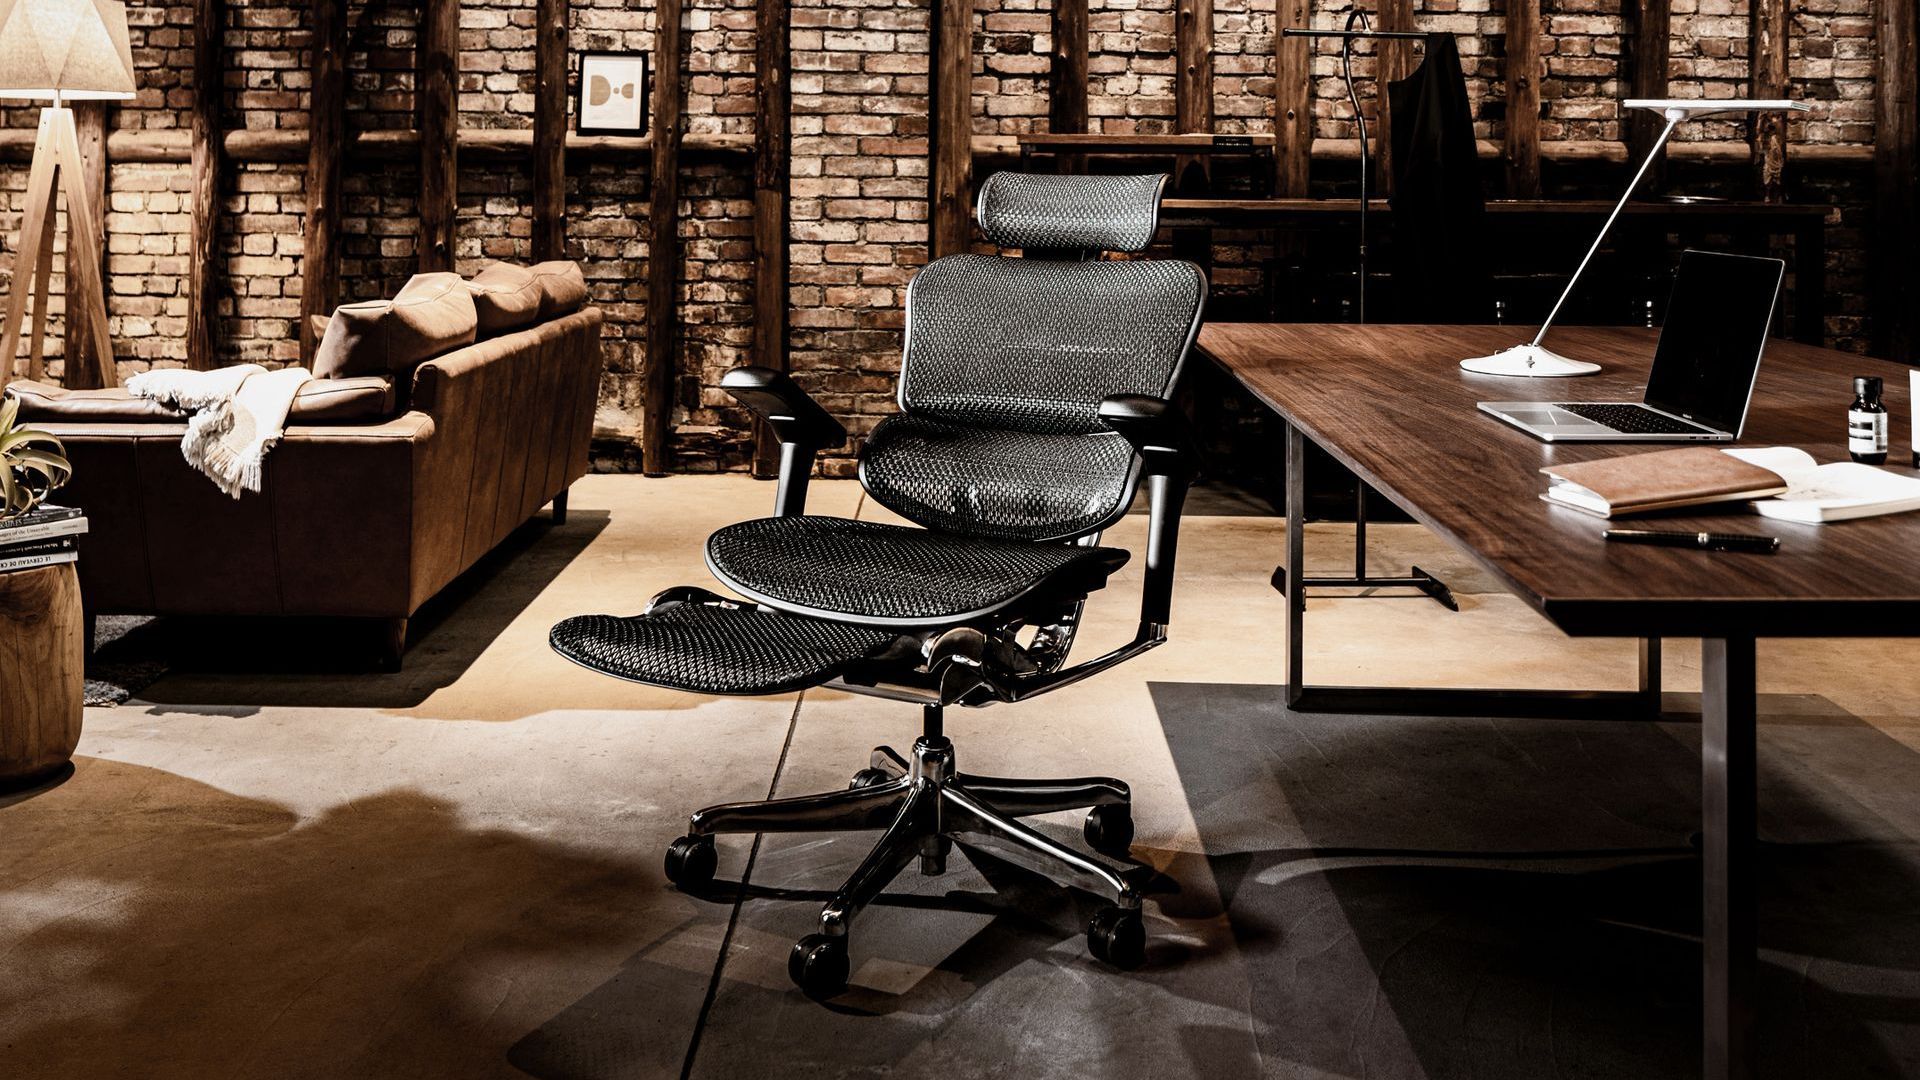 A modern lounge style room with brick walls and leather sofa has a black mesh office chair with a legrest in a reclined position sitting beside a desk.